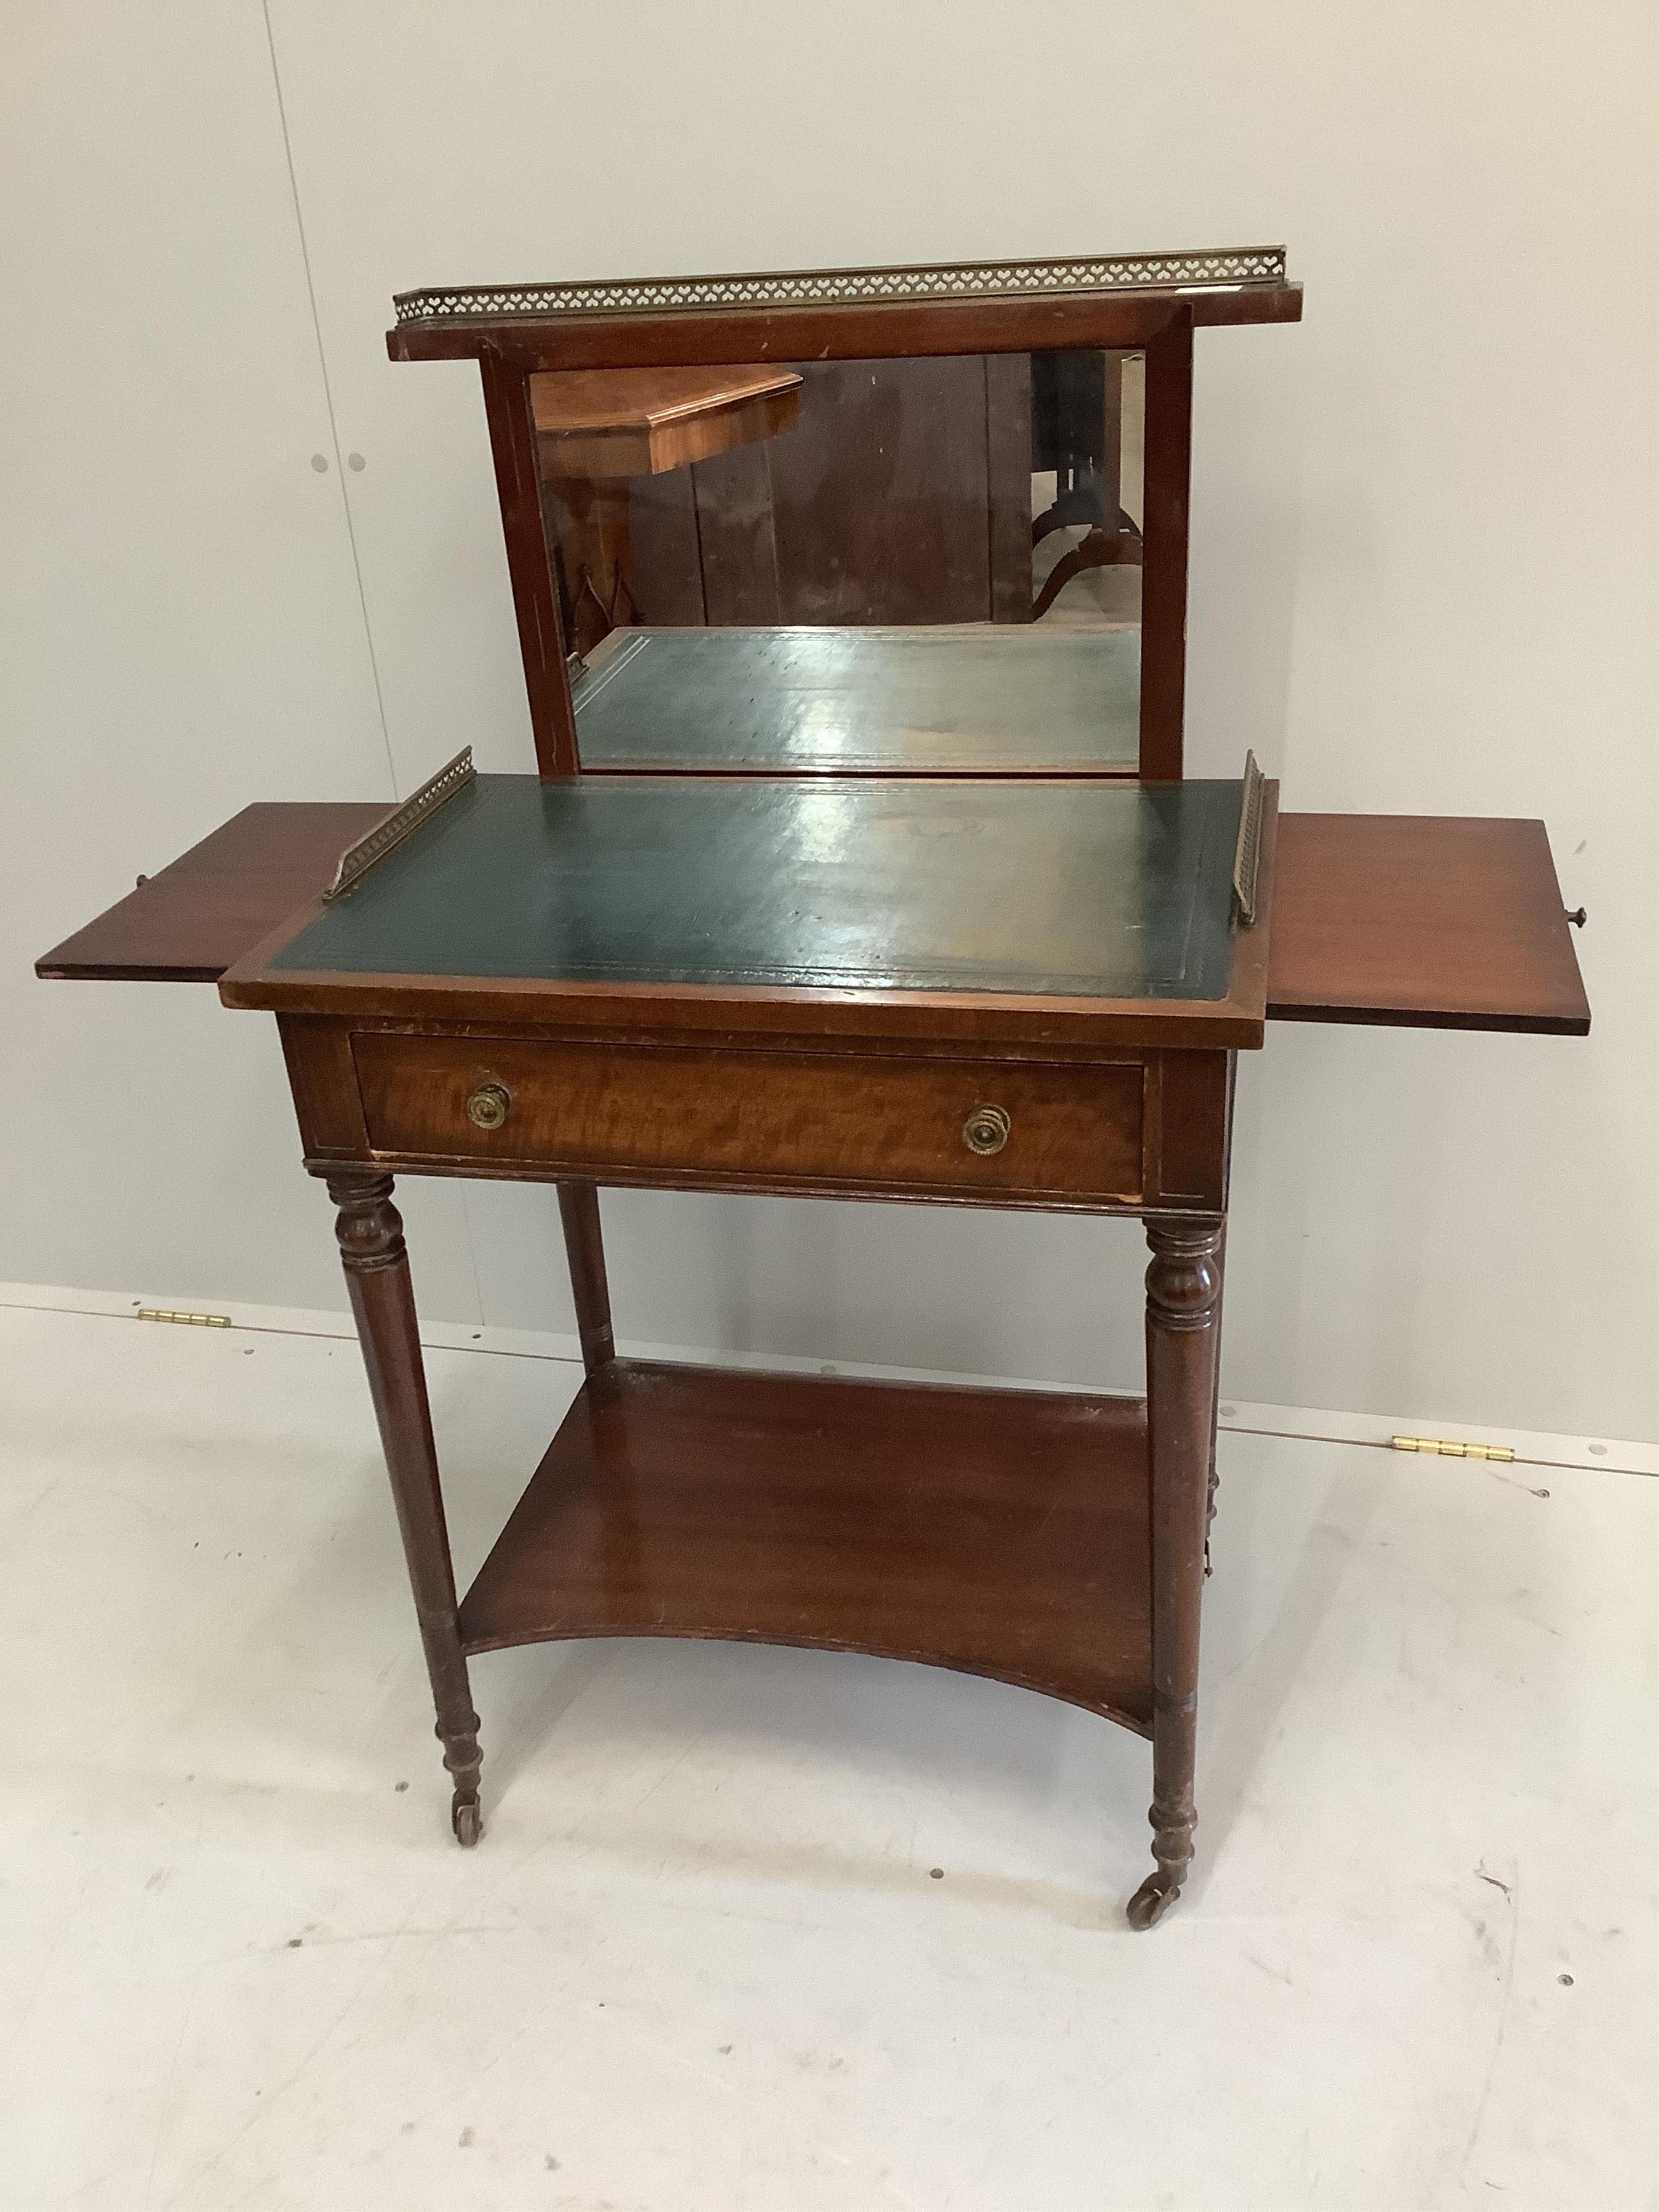 A Regency style mahogany writing / dressing table with rising mirror, width 62cm, depth 45cm, height 75cm. Condition - fair